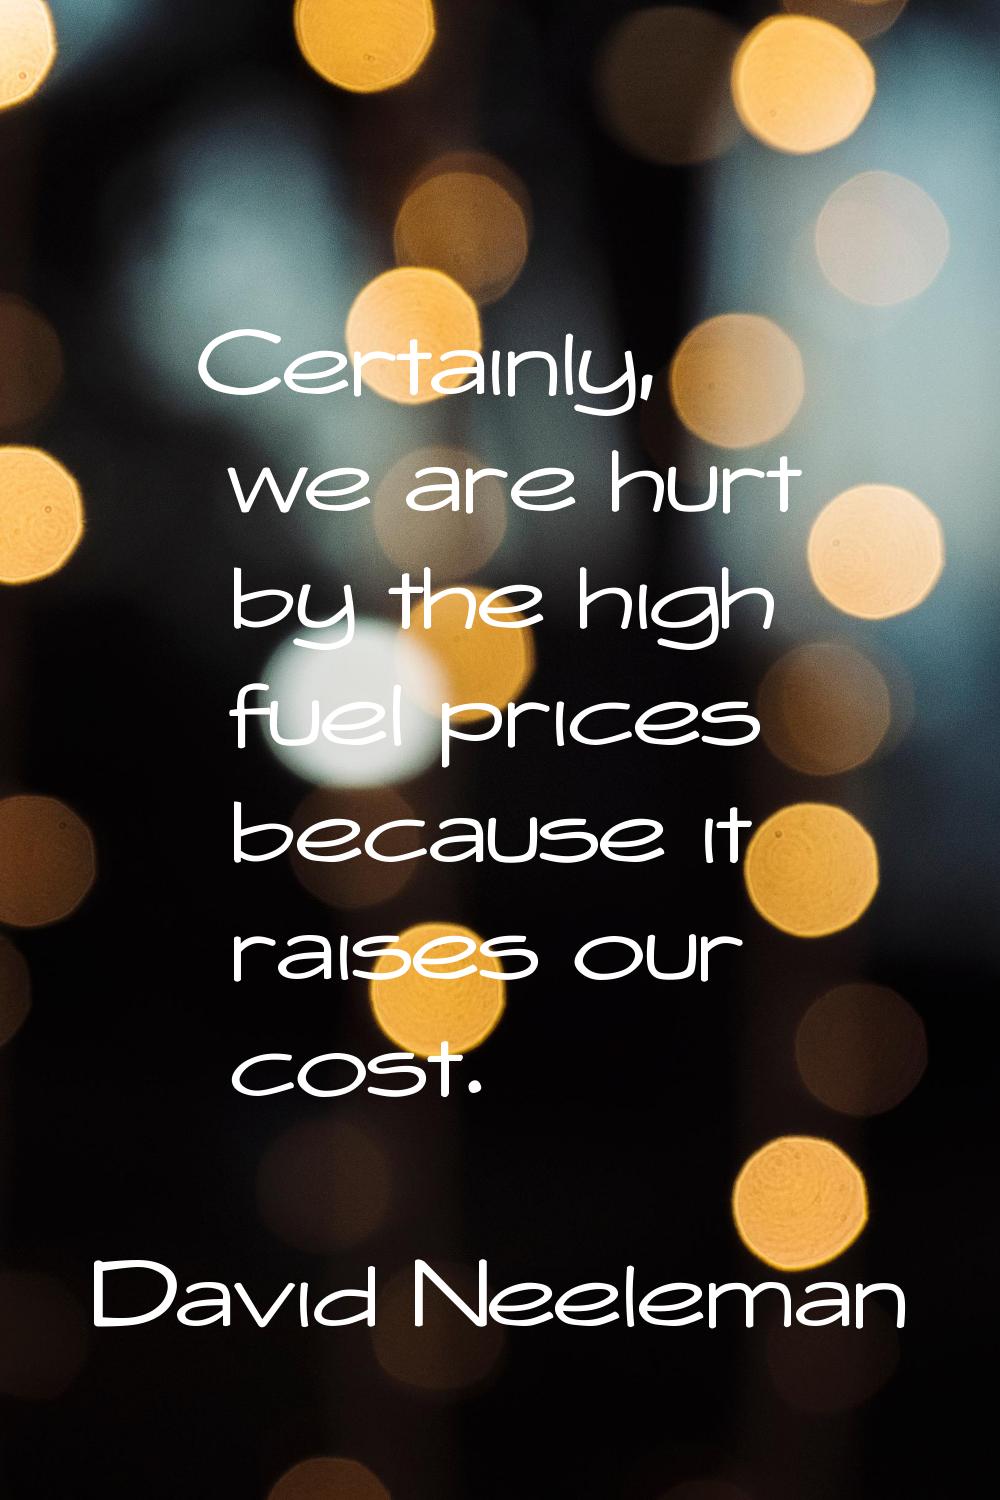 Certainly, we are hurt by the high fuel prices because it raises our cost.